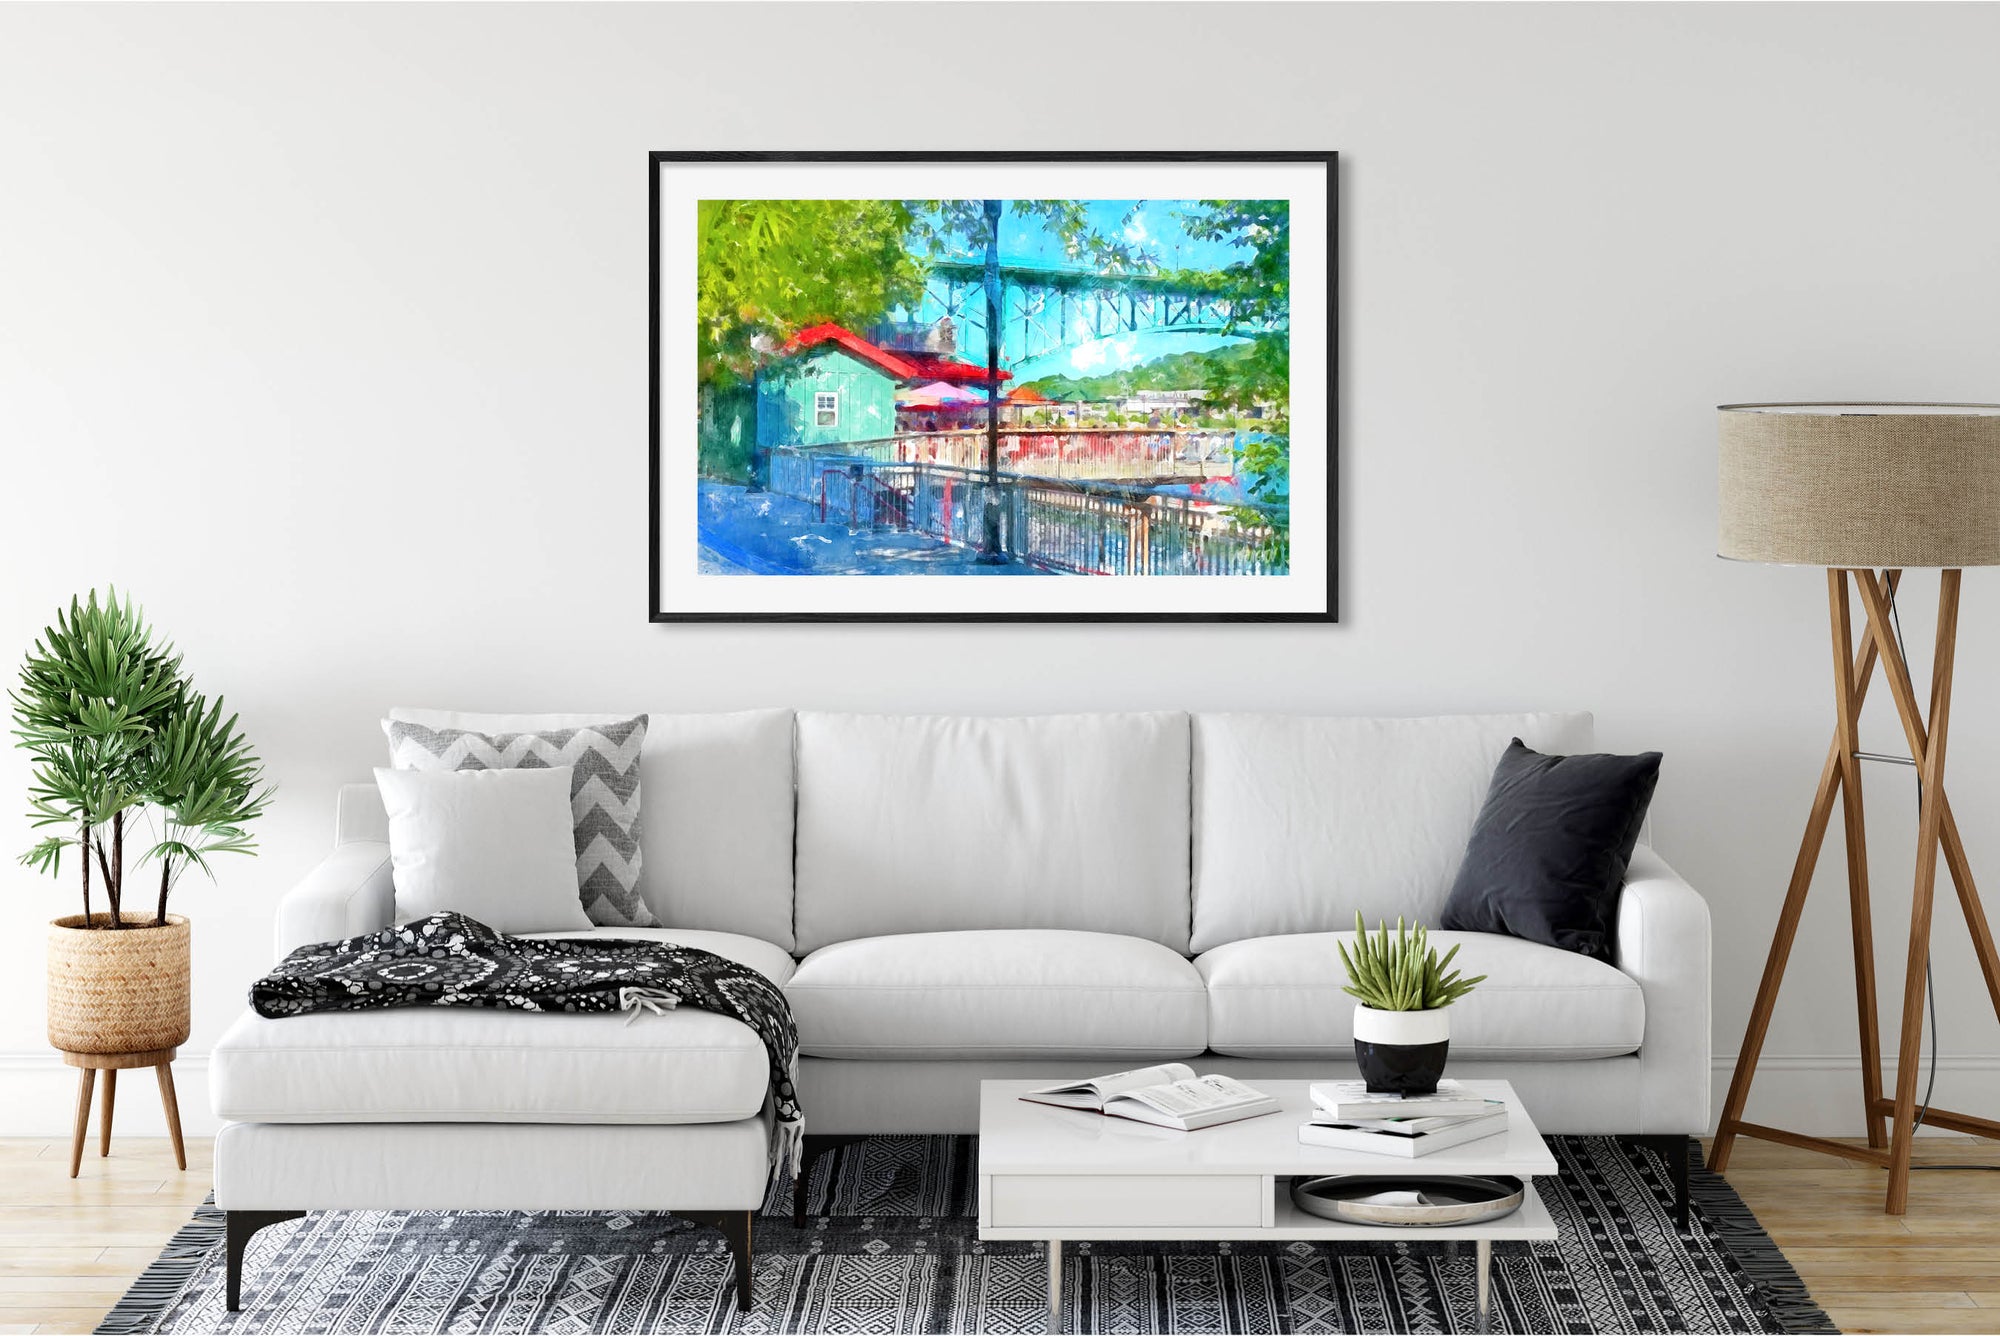 Along the River - Knoxville Art Print in Room